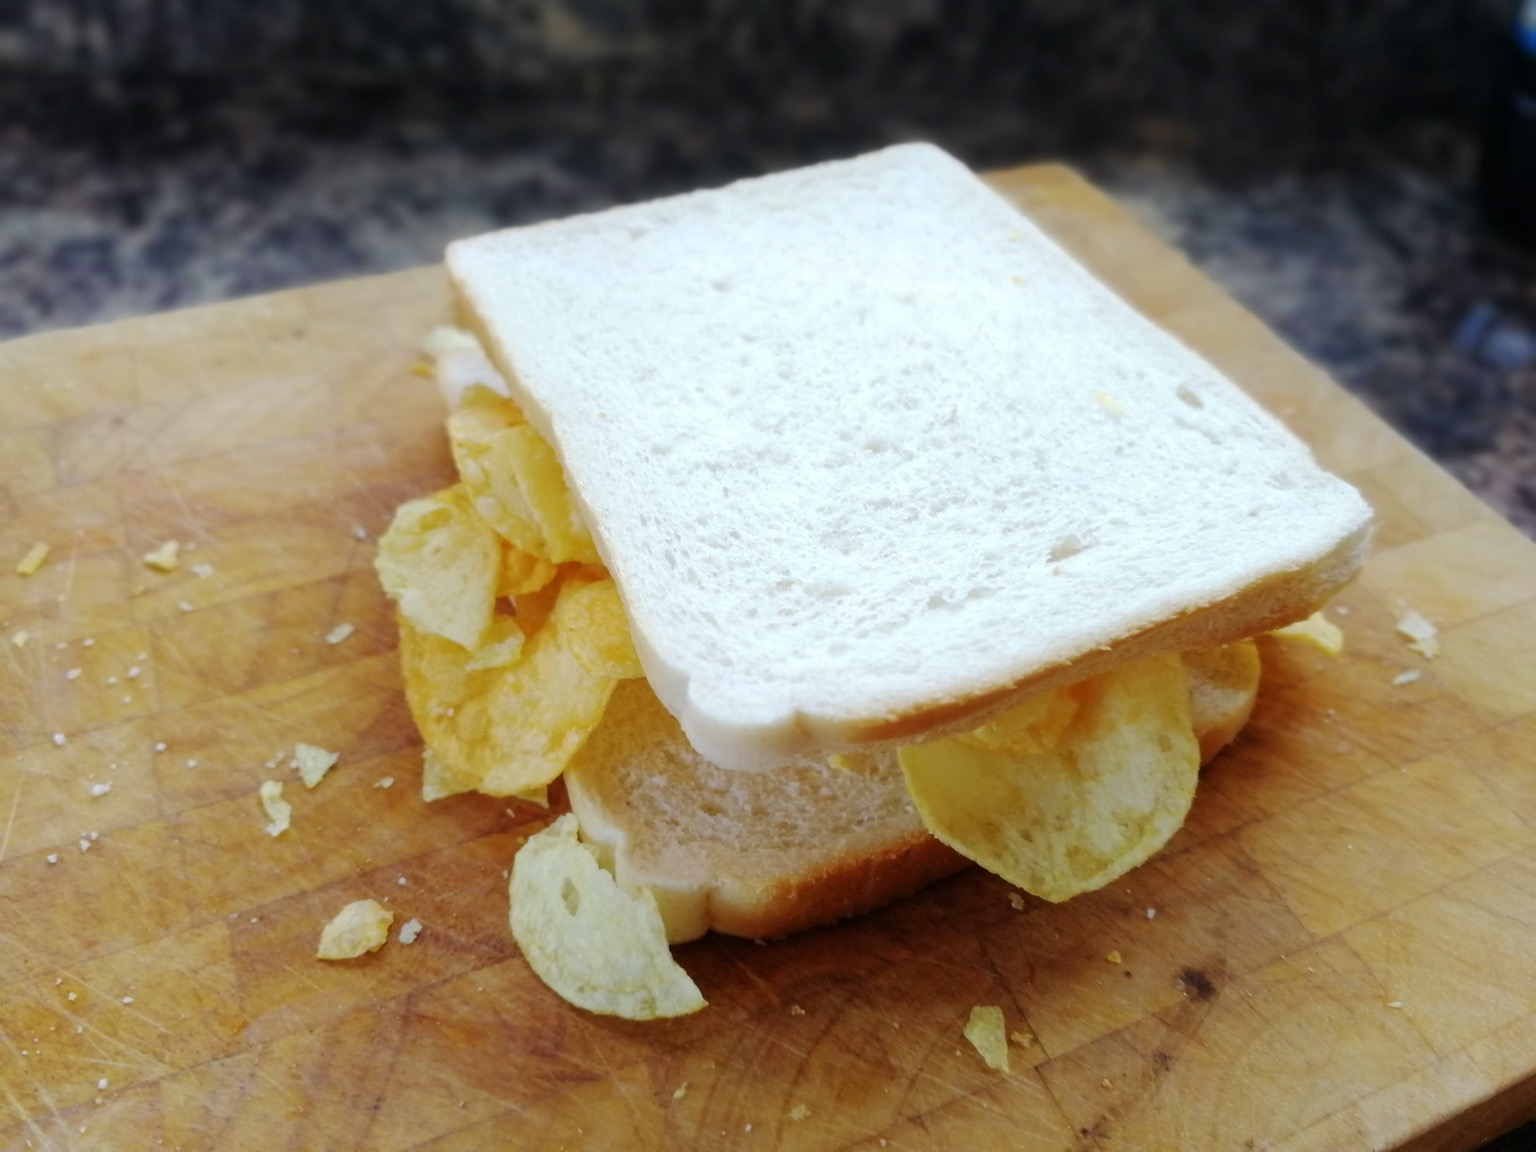 White bread sandwich with crisps falling out